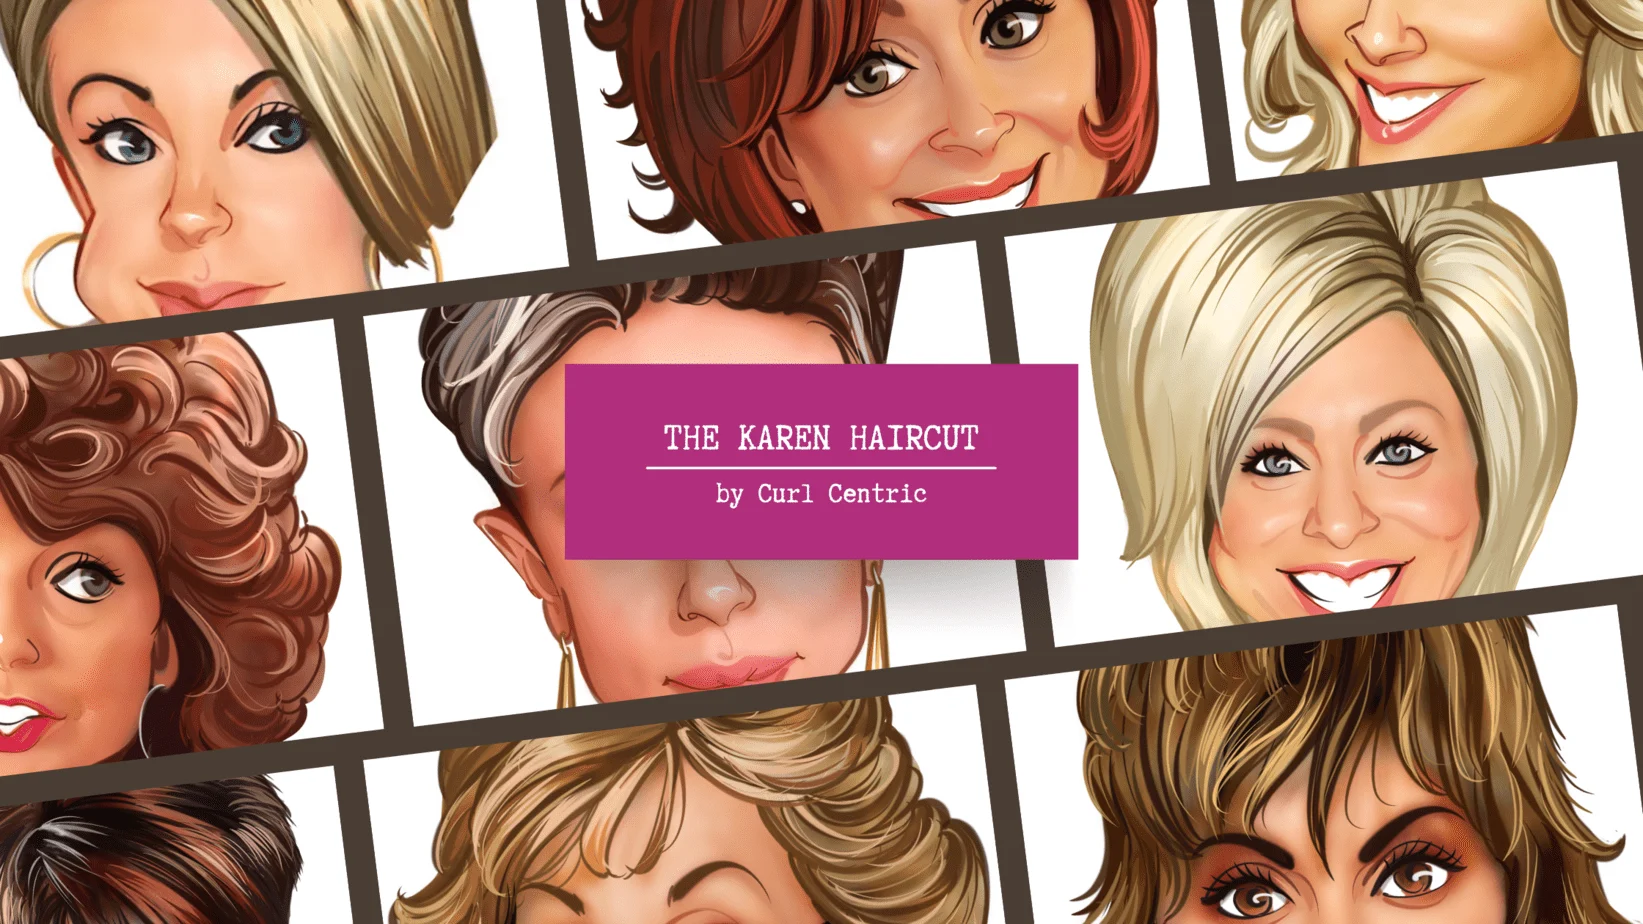 The popular Karen Haircut is usually a medium hair style with shaggy layers or a blunt bob with a few layers.